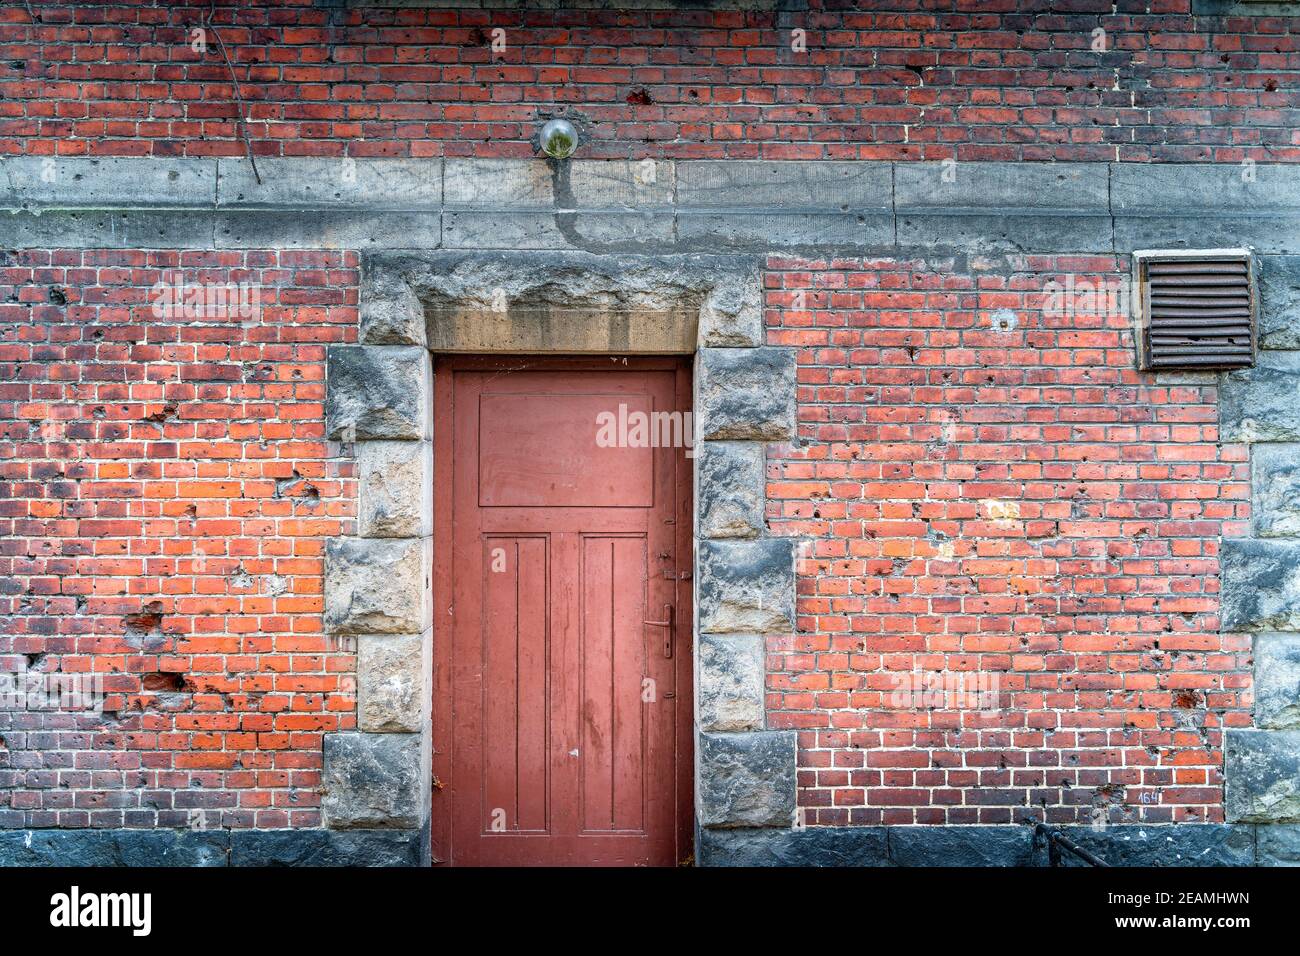 Bullet holes in a house facade from World War II. Rustic, red brick wall with doors Stock Photo